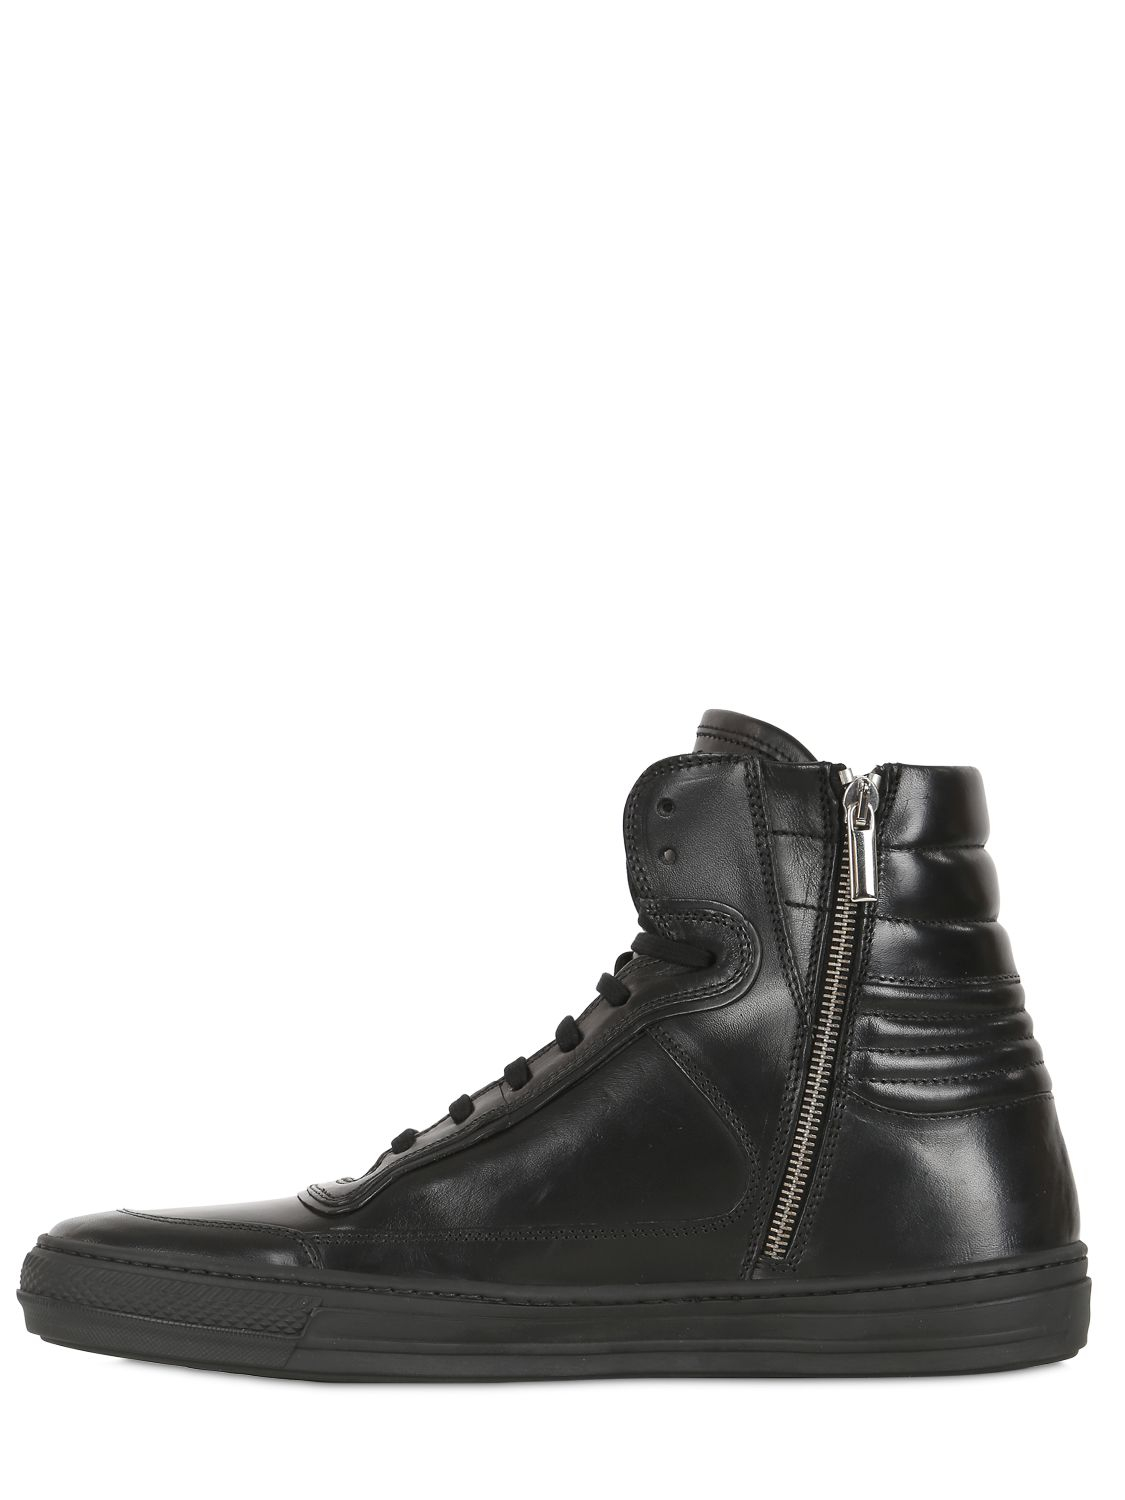 Lyst - Diesel Black Gold Smooth Leather High Top Sneakers in Black for Men